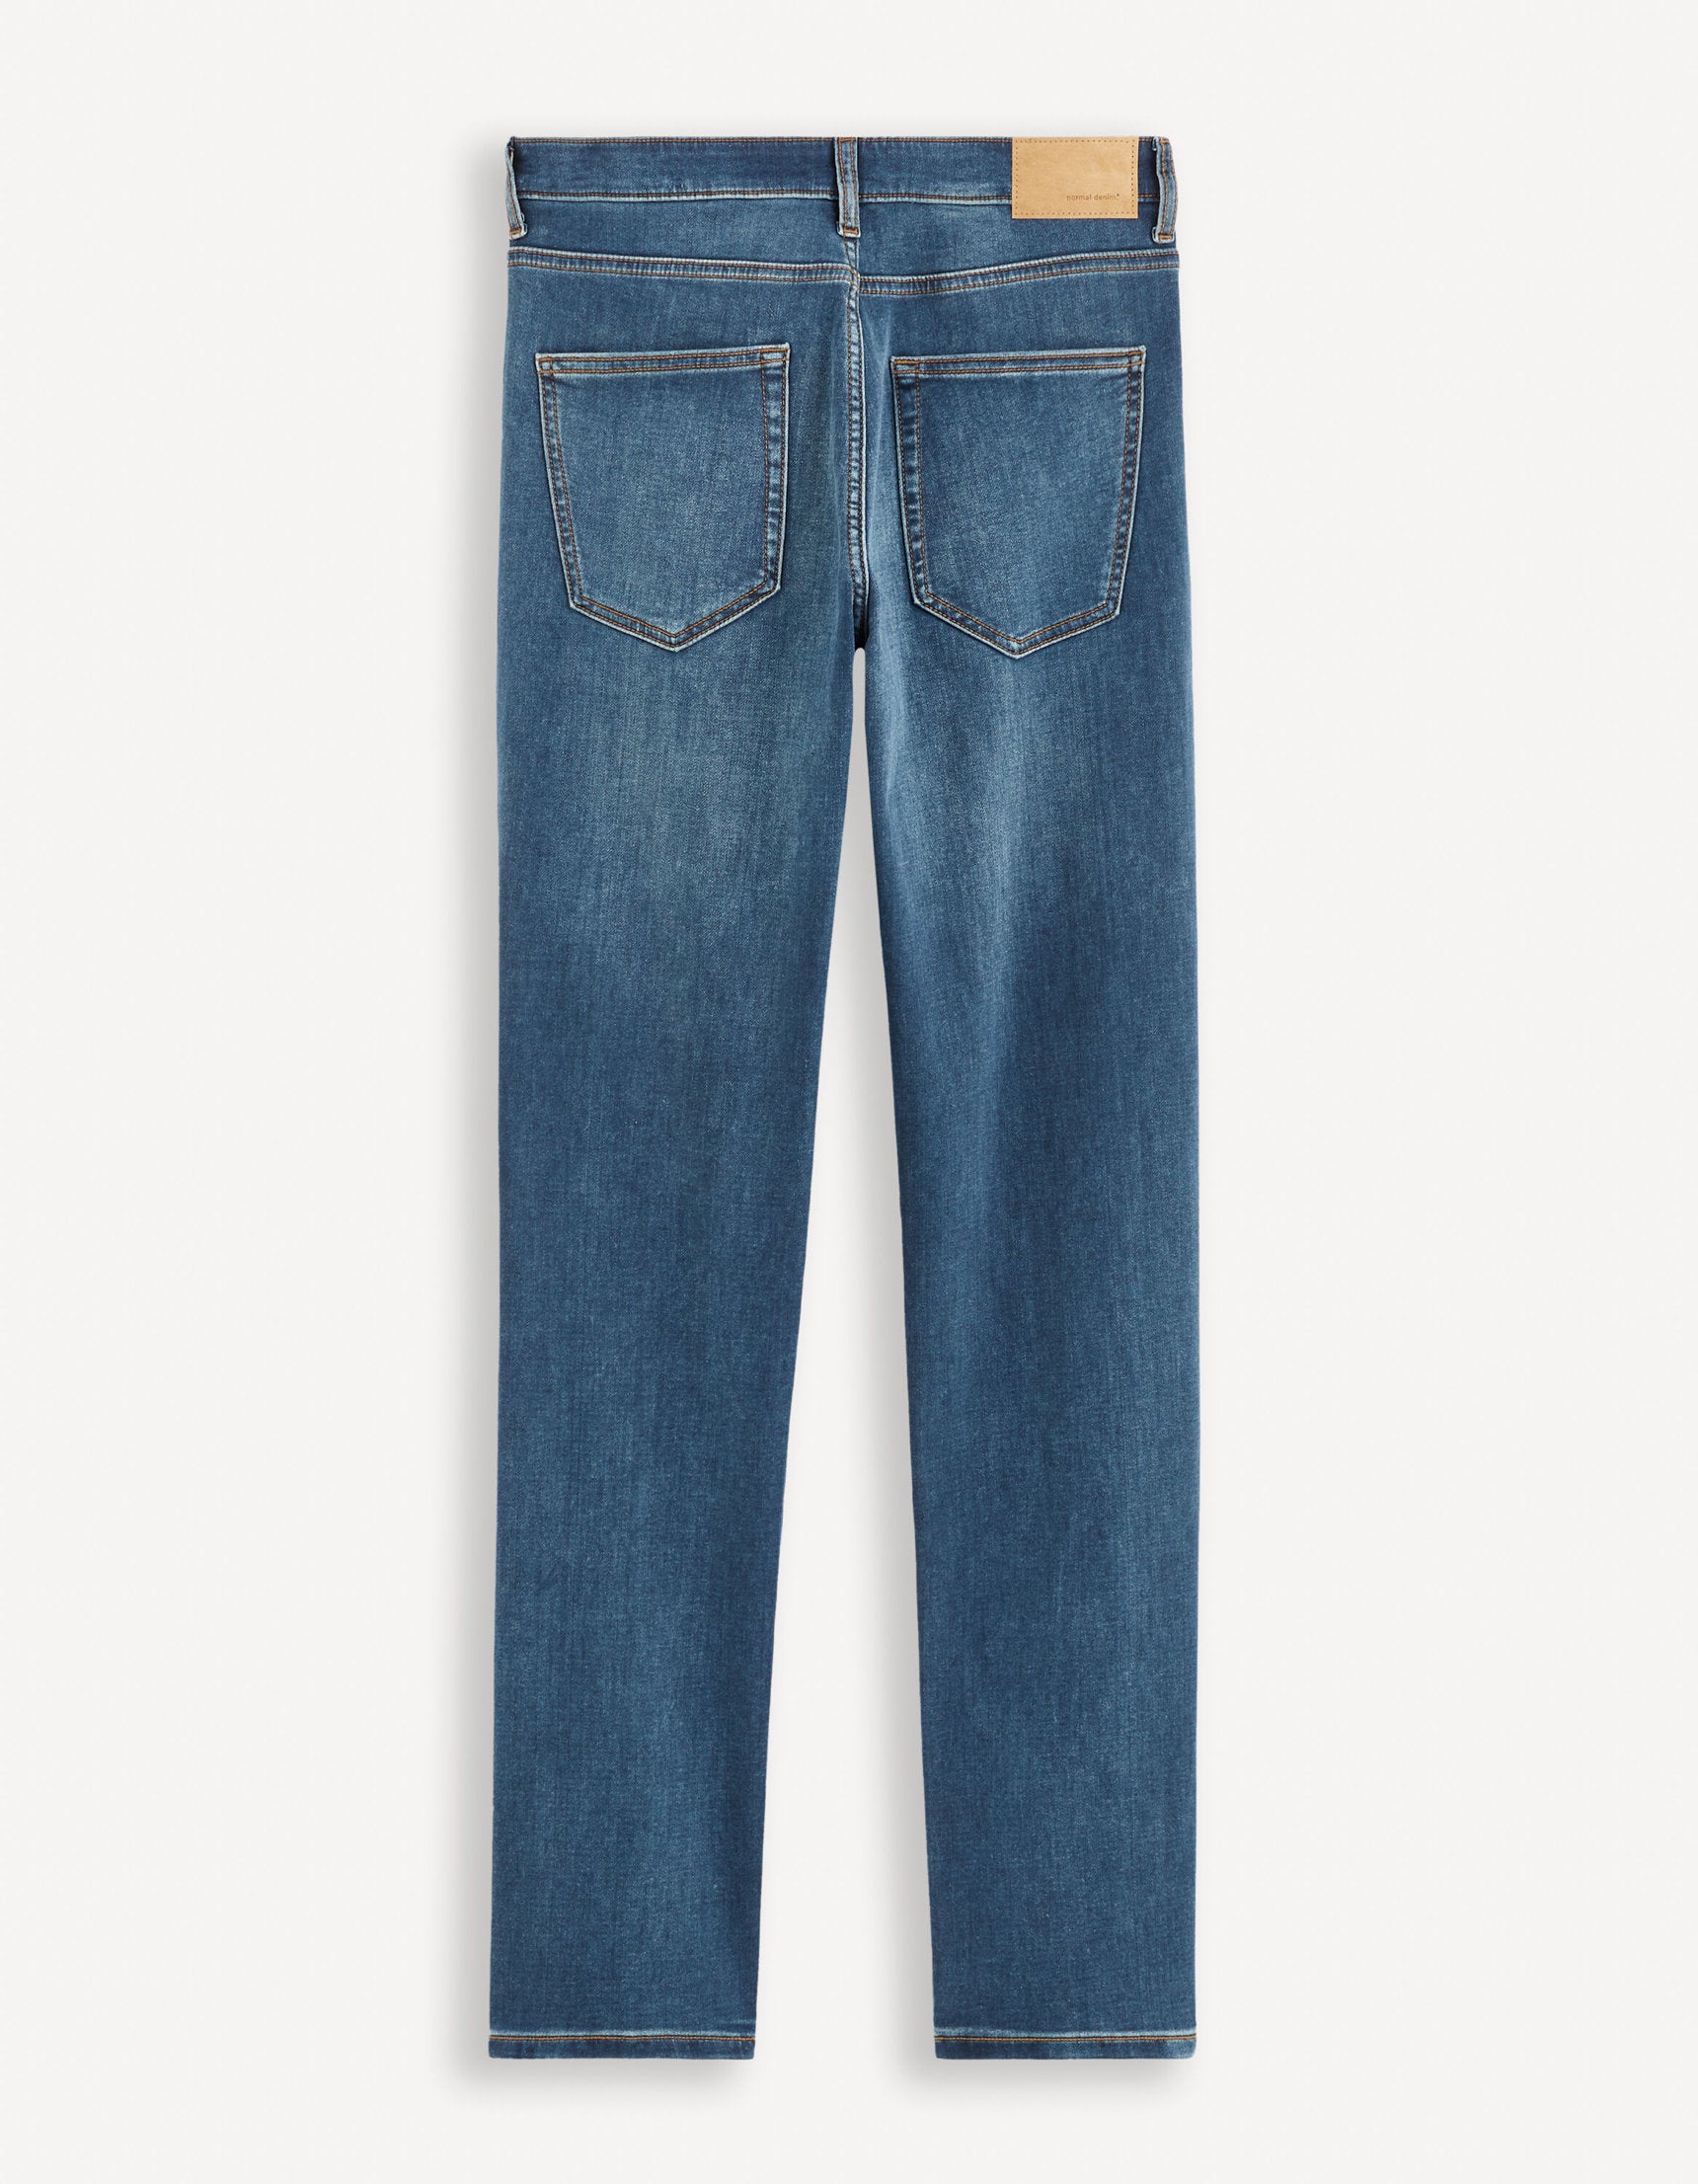 C15 Straight Jeans 3 Lengths Stretch - Double Stone_FOKLO15_DOUBLE STONE_06